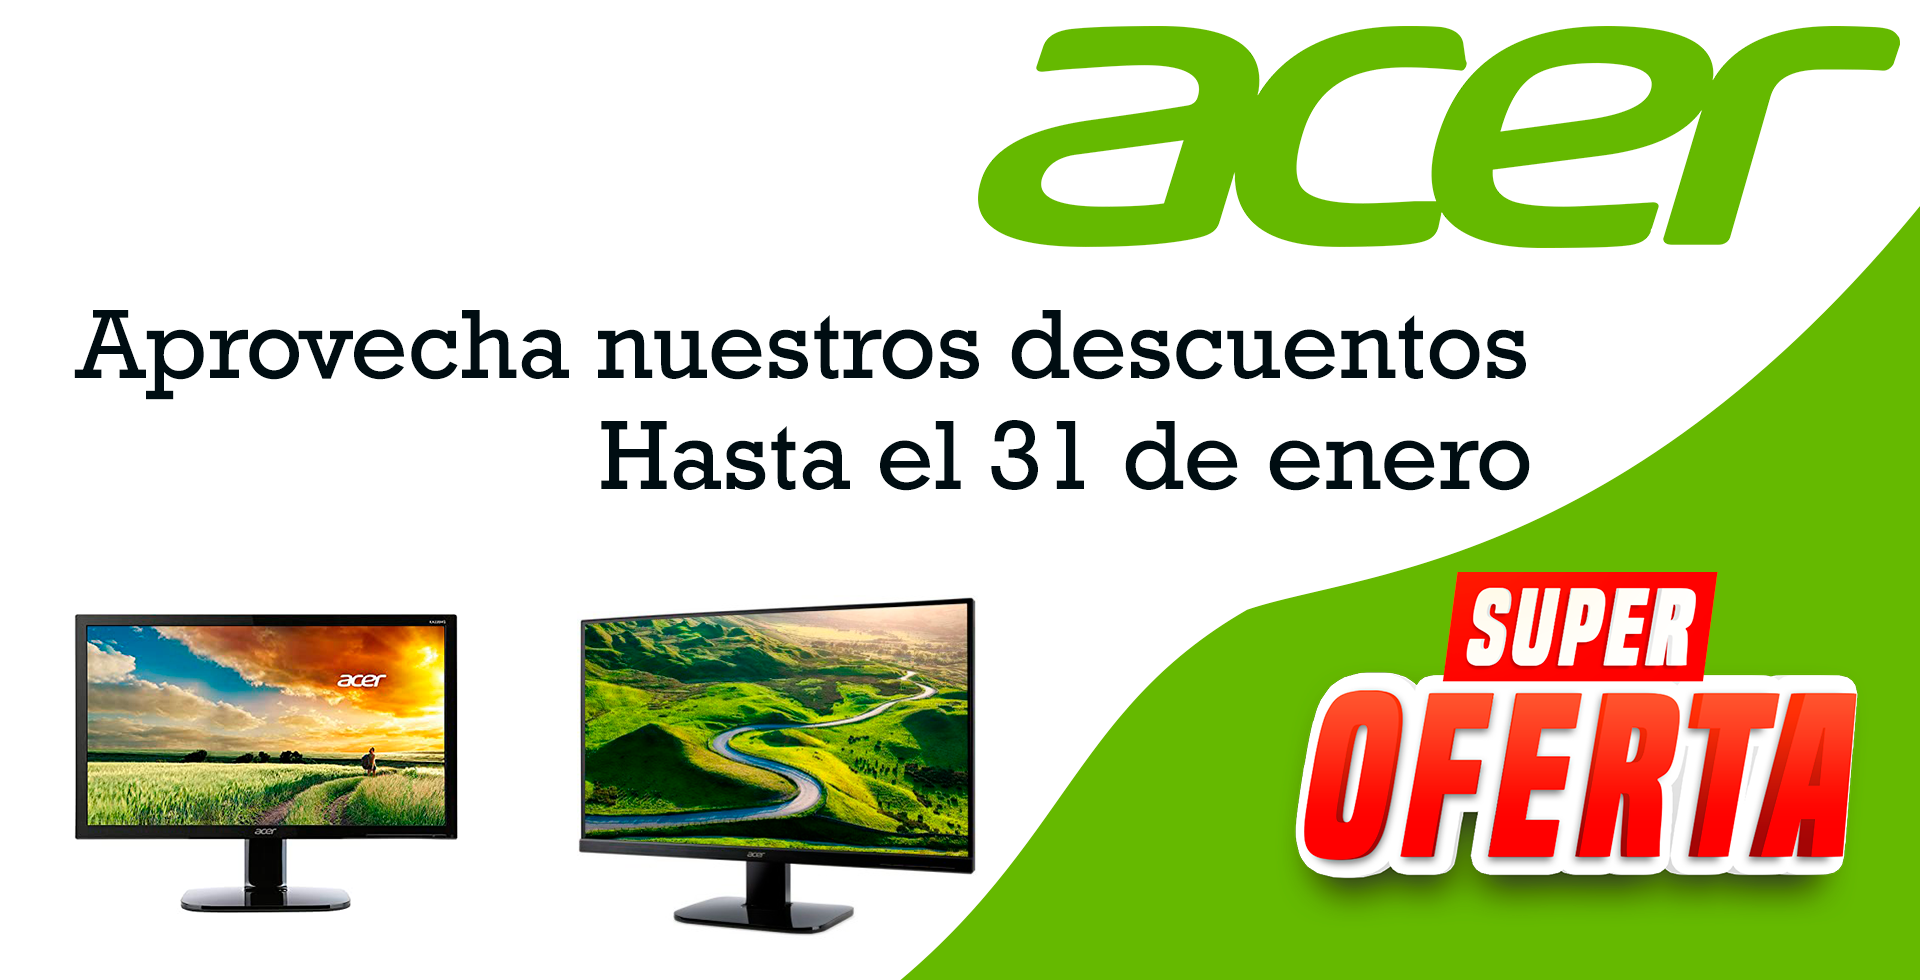 Monitores Acer